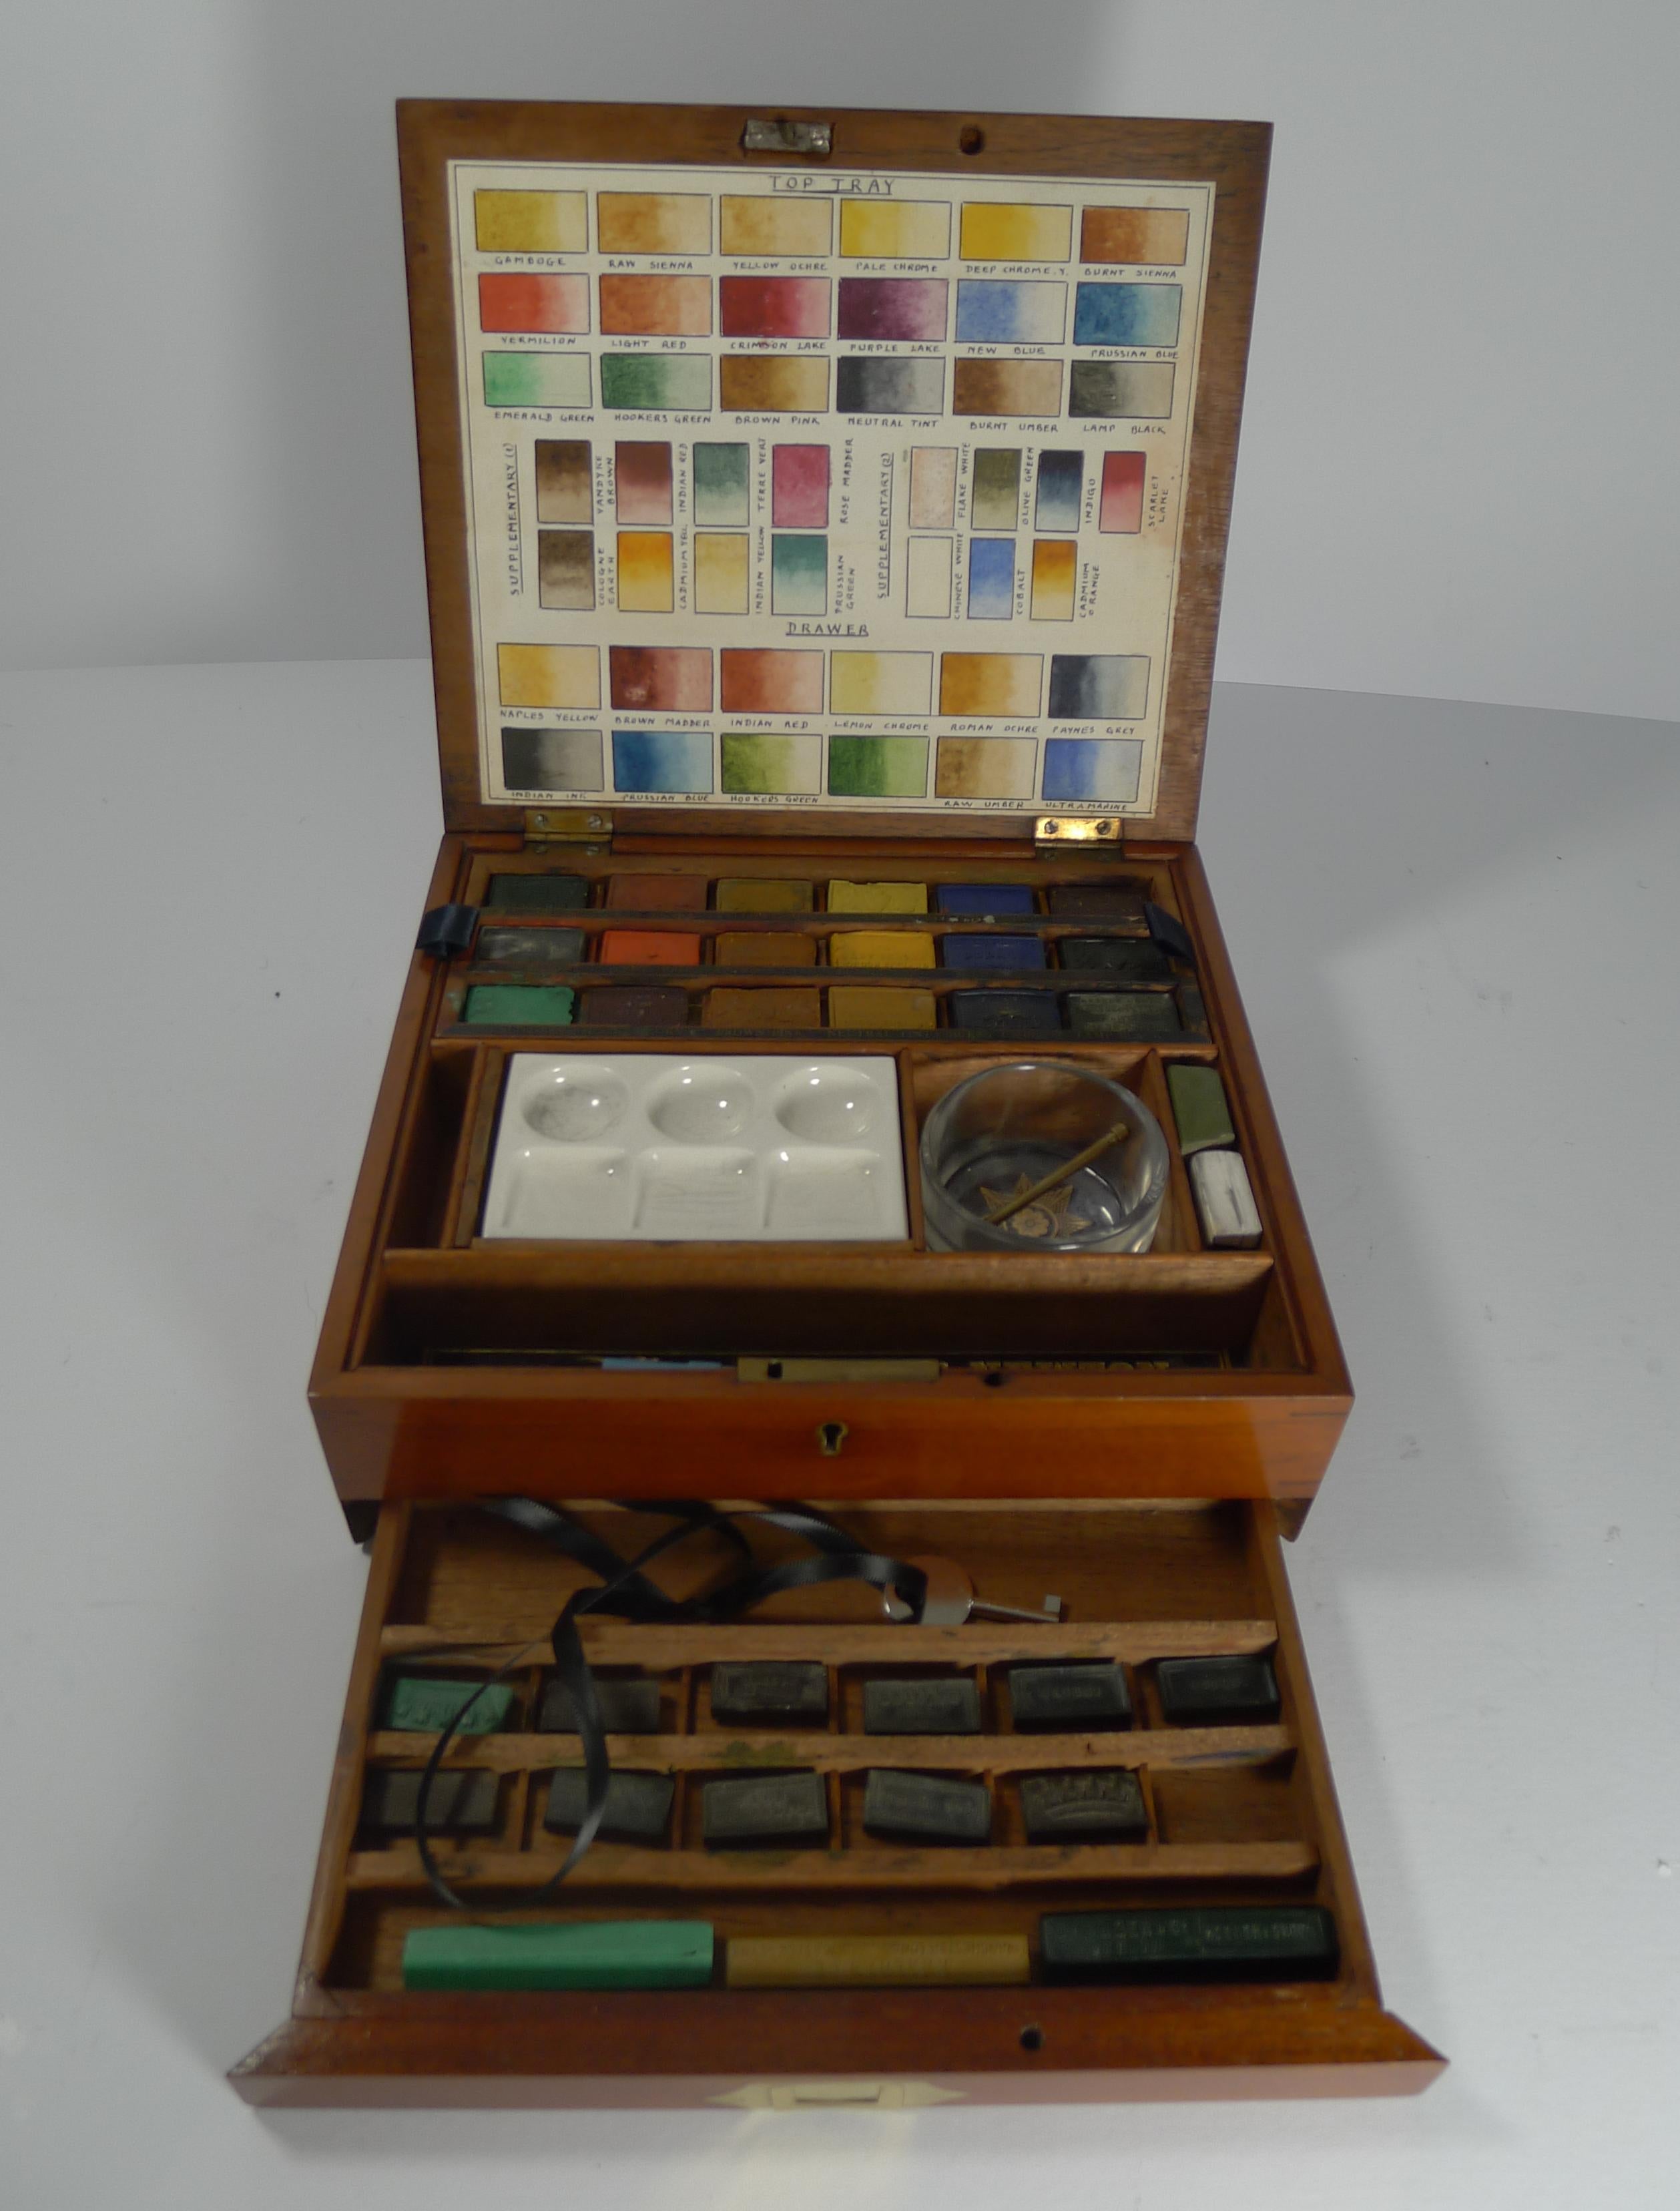 These highly sought-after Victorian paint boxes are particularly a joy to find made by the famous Winsor & Newton. This one dates to circa 1870, made from Mahogany, the box is in great shape with an ebonized edge.

In 1835, Winsor and Newton